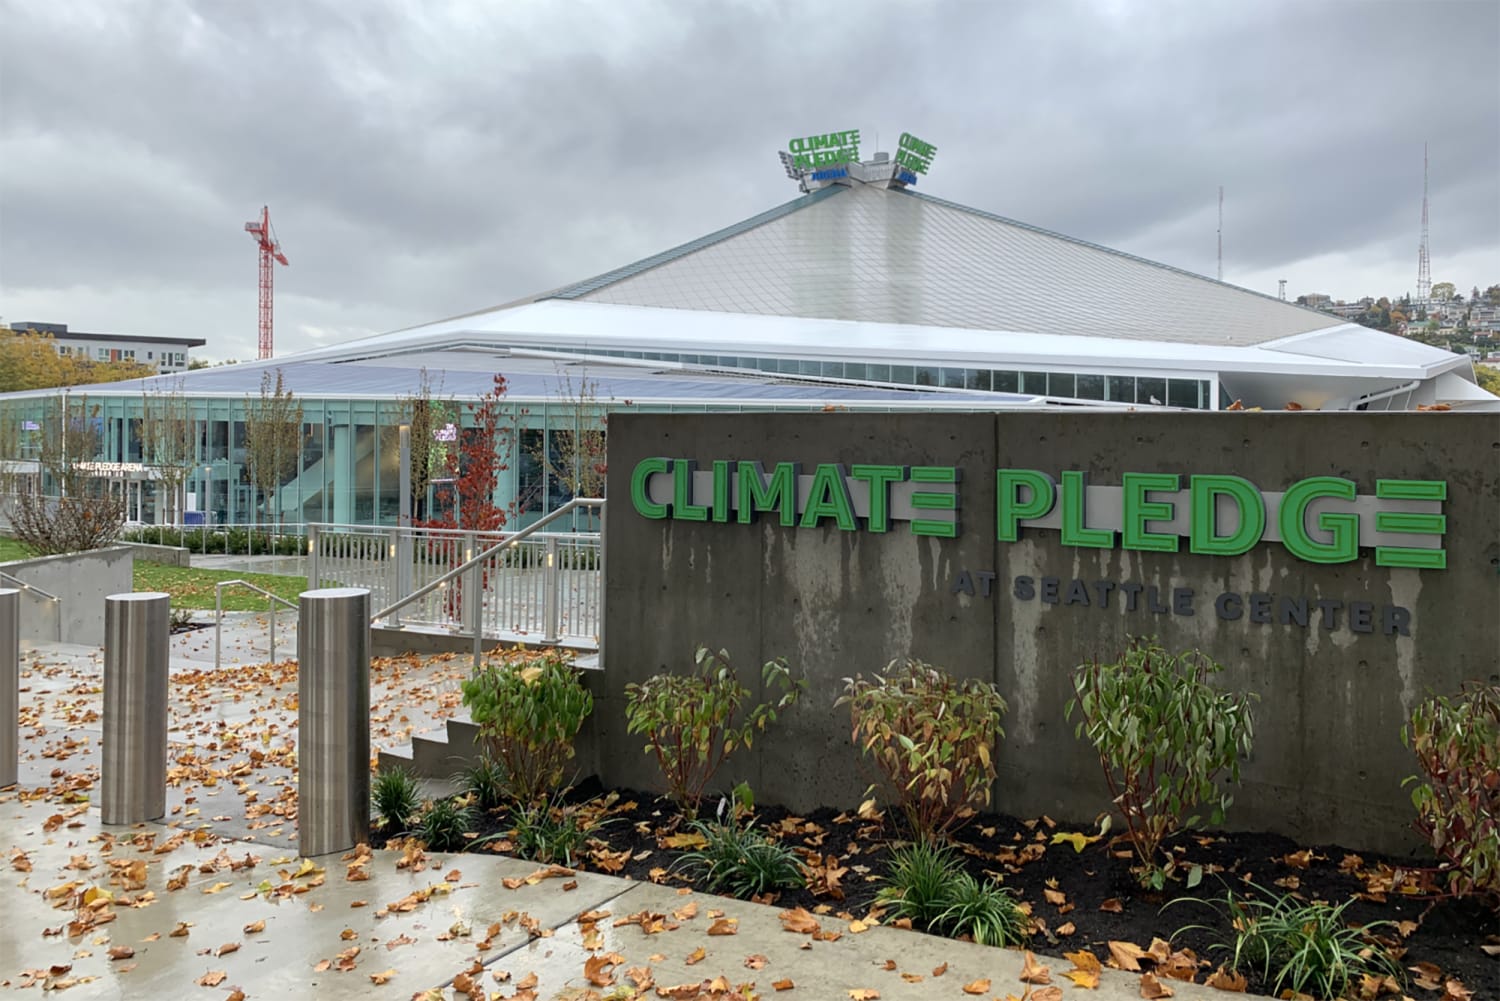 Vaccinations, Masks to Be Required for Kraken Games, Other Events at  Climate Pledge Arena